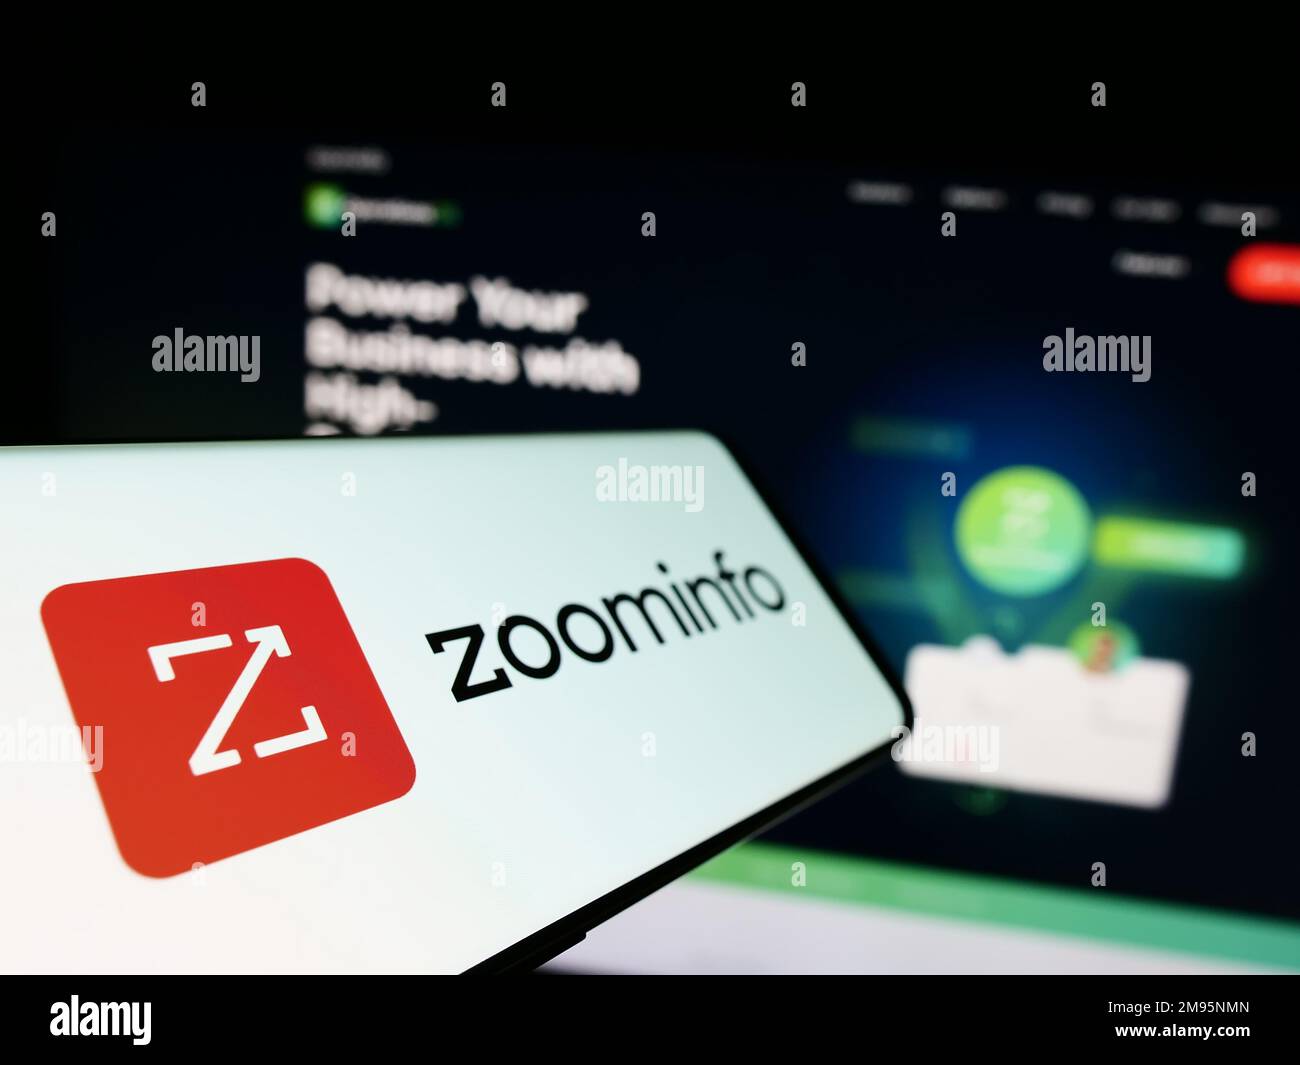 Mobile phone with logo of American software company ZoomInfo Technologies Inc. on screen in front of website. Focus on left of phone display. Stock Photo